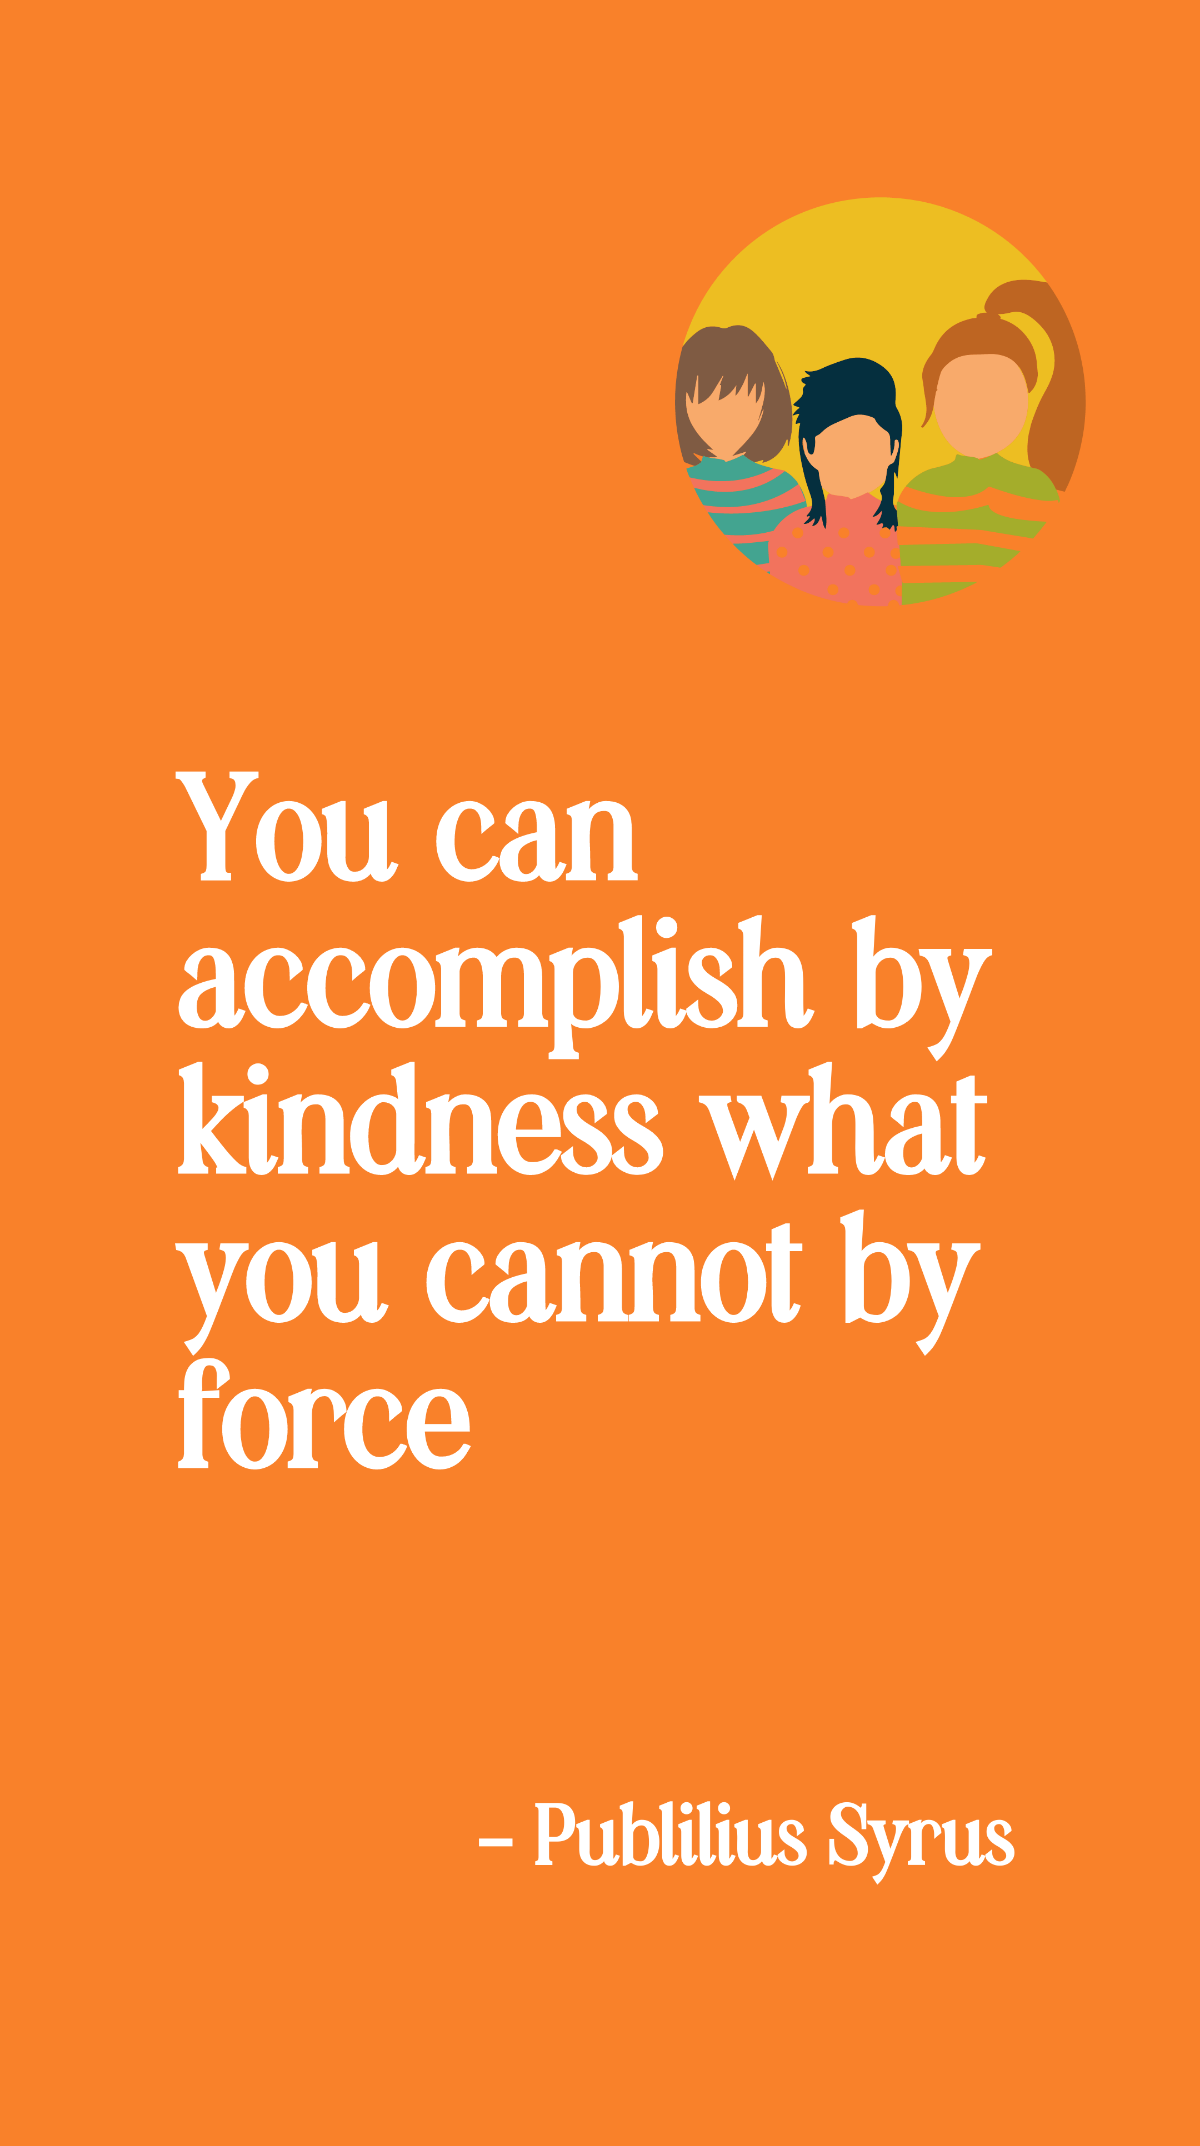 Free Publilius Syrus - You can accomplish by kindness what you cannot by force Template